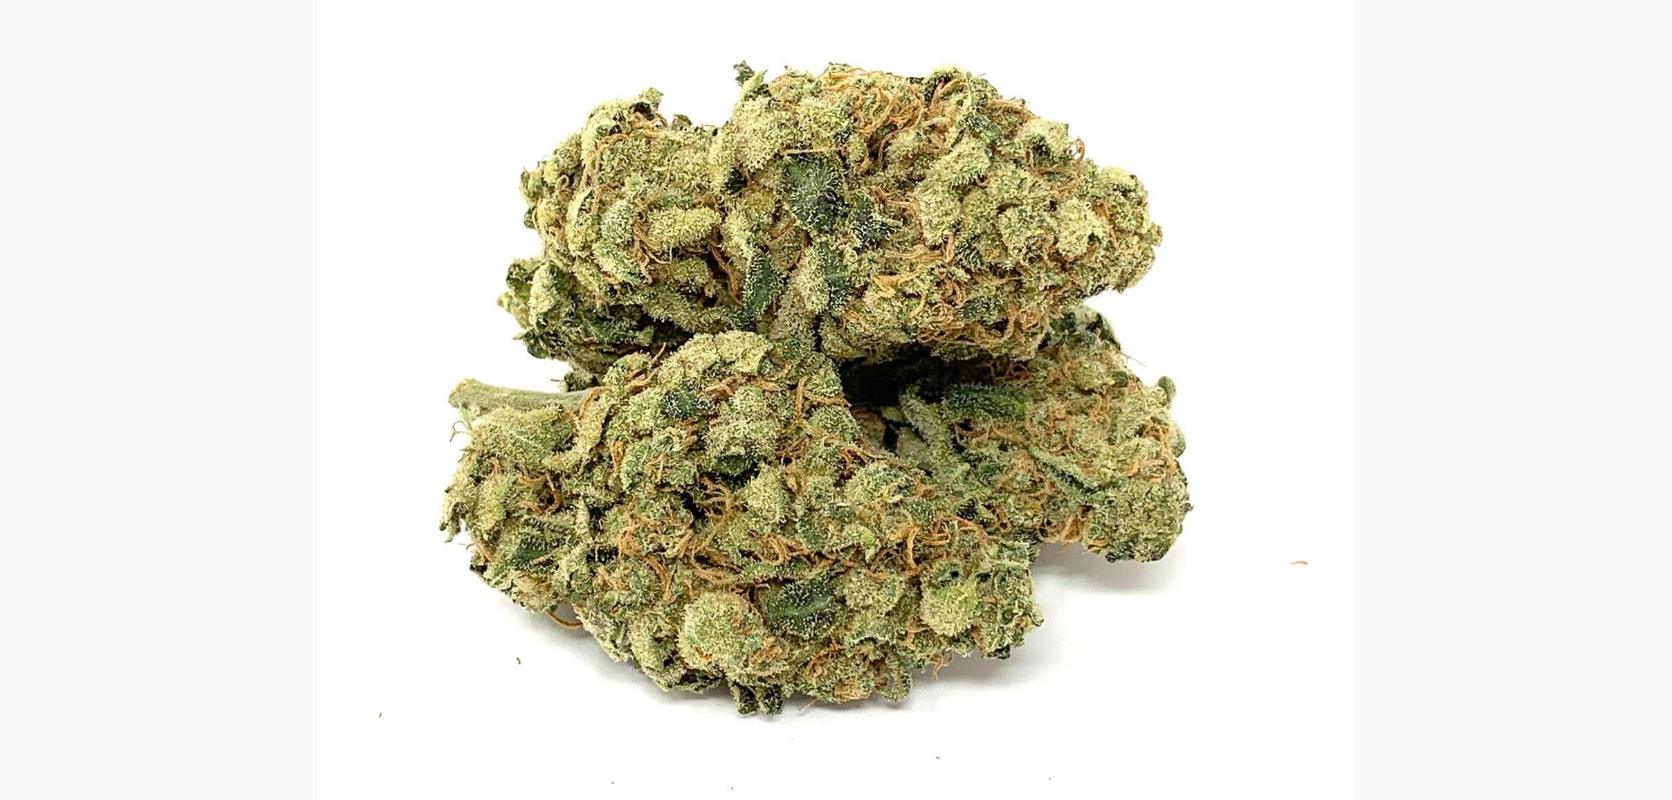 The Green Congo strain is a mild to moderate cannabis strain with around 17 to 18 percent of THC.